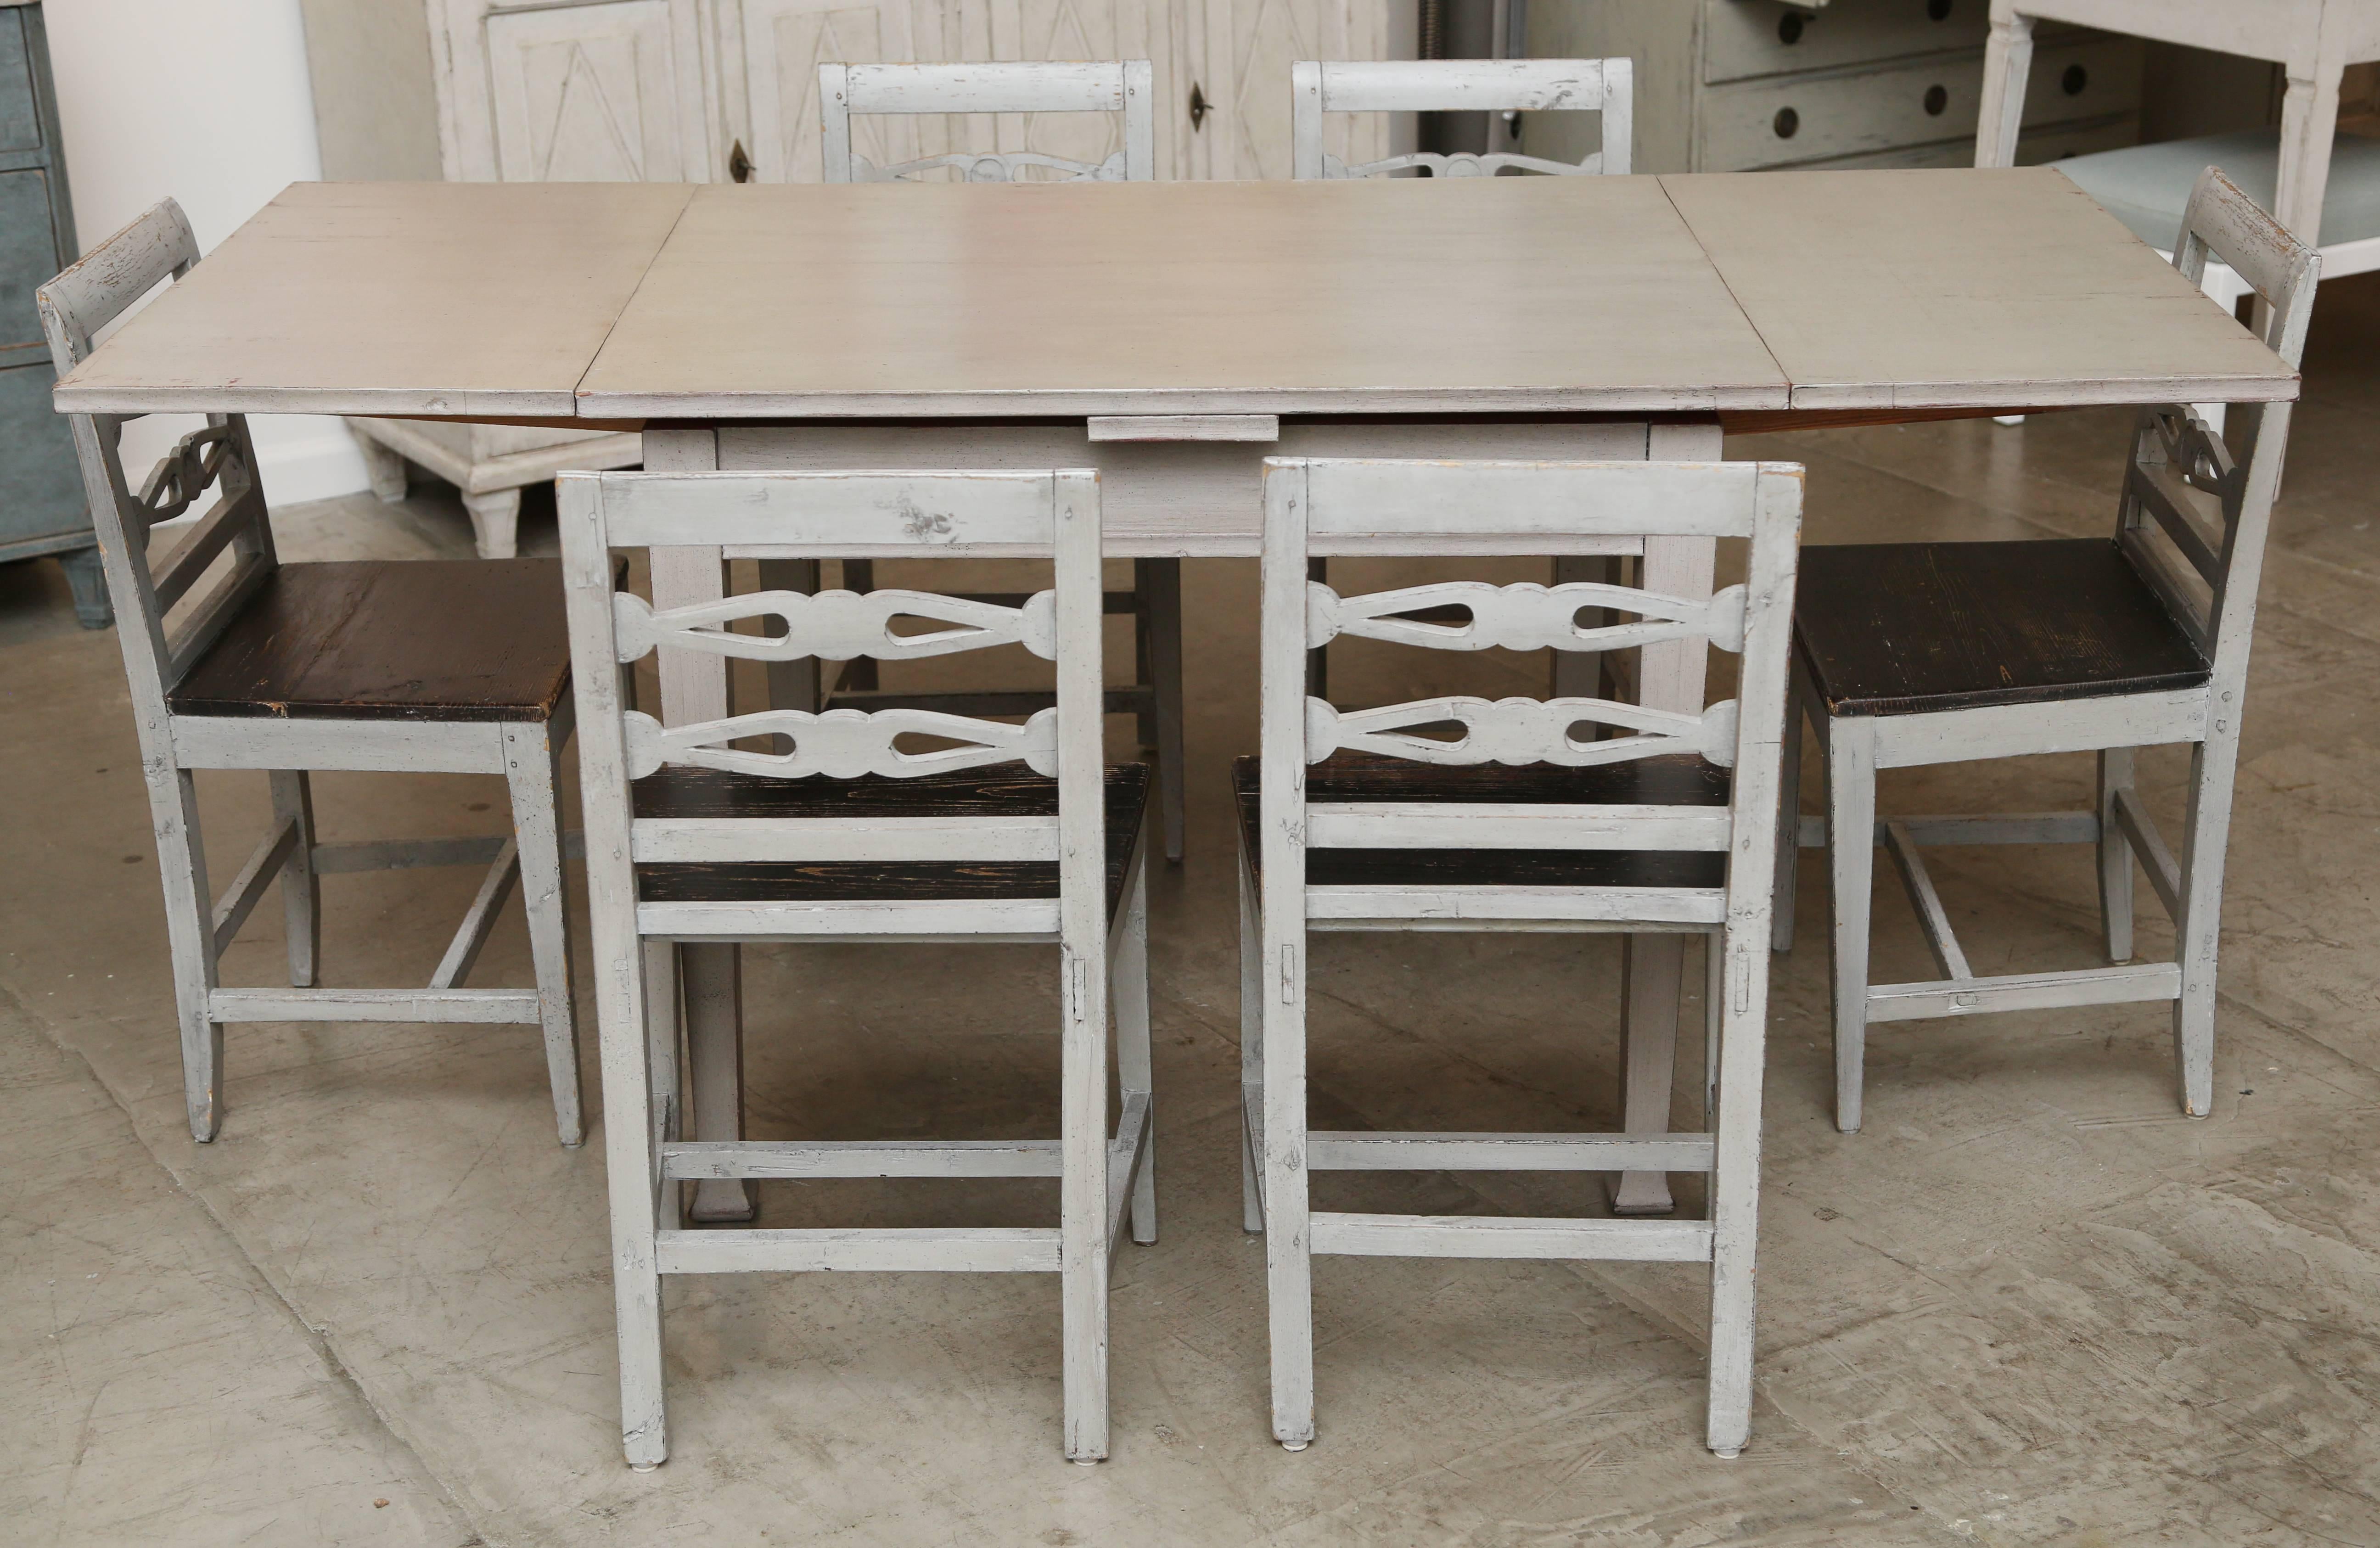 This antique Swedish dining table is wonderfully unique.
It is expandable and can seat six comfortably.
Useful as a breakfast table or where space is limited.
Painted grey.

Measures: 30.00'' H x 37.25'' W x 31.25'' D   68.50'' fully open

The six